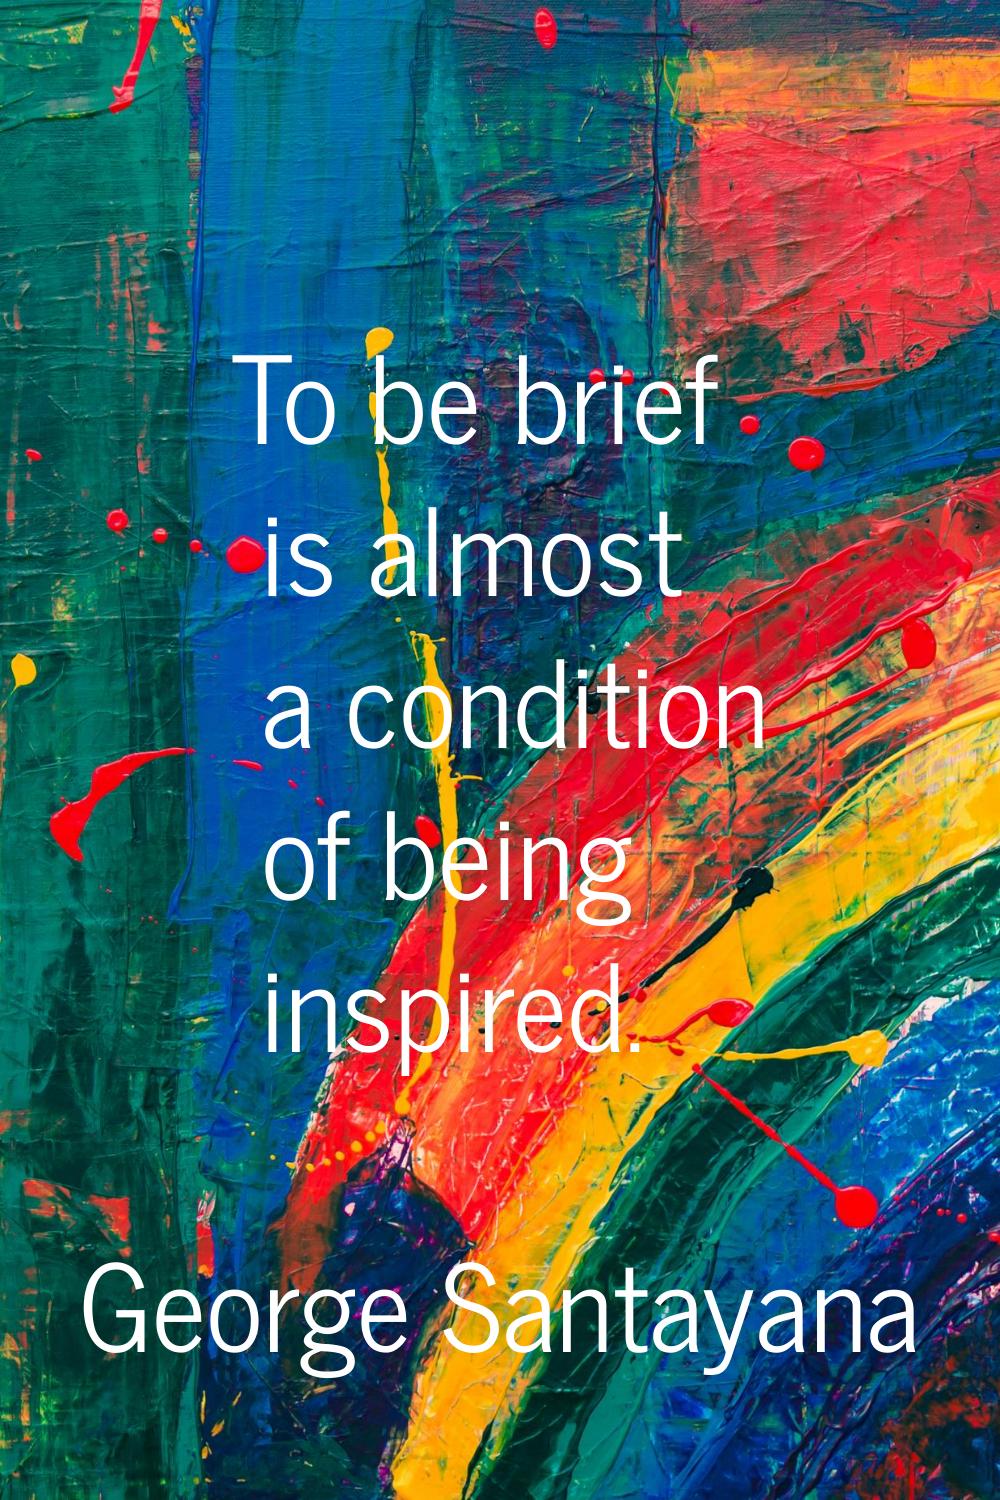 To be brief is almost a condition of being inspired.